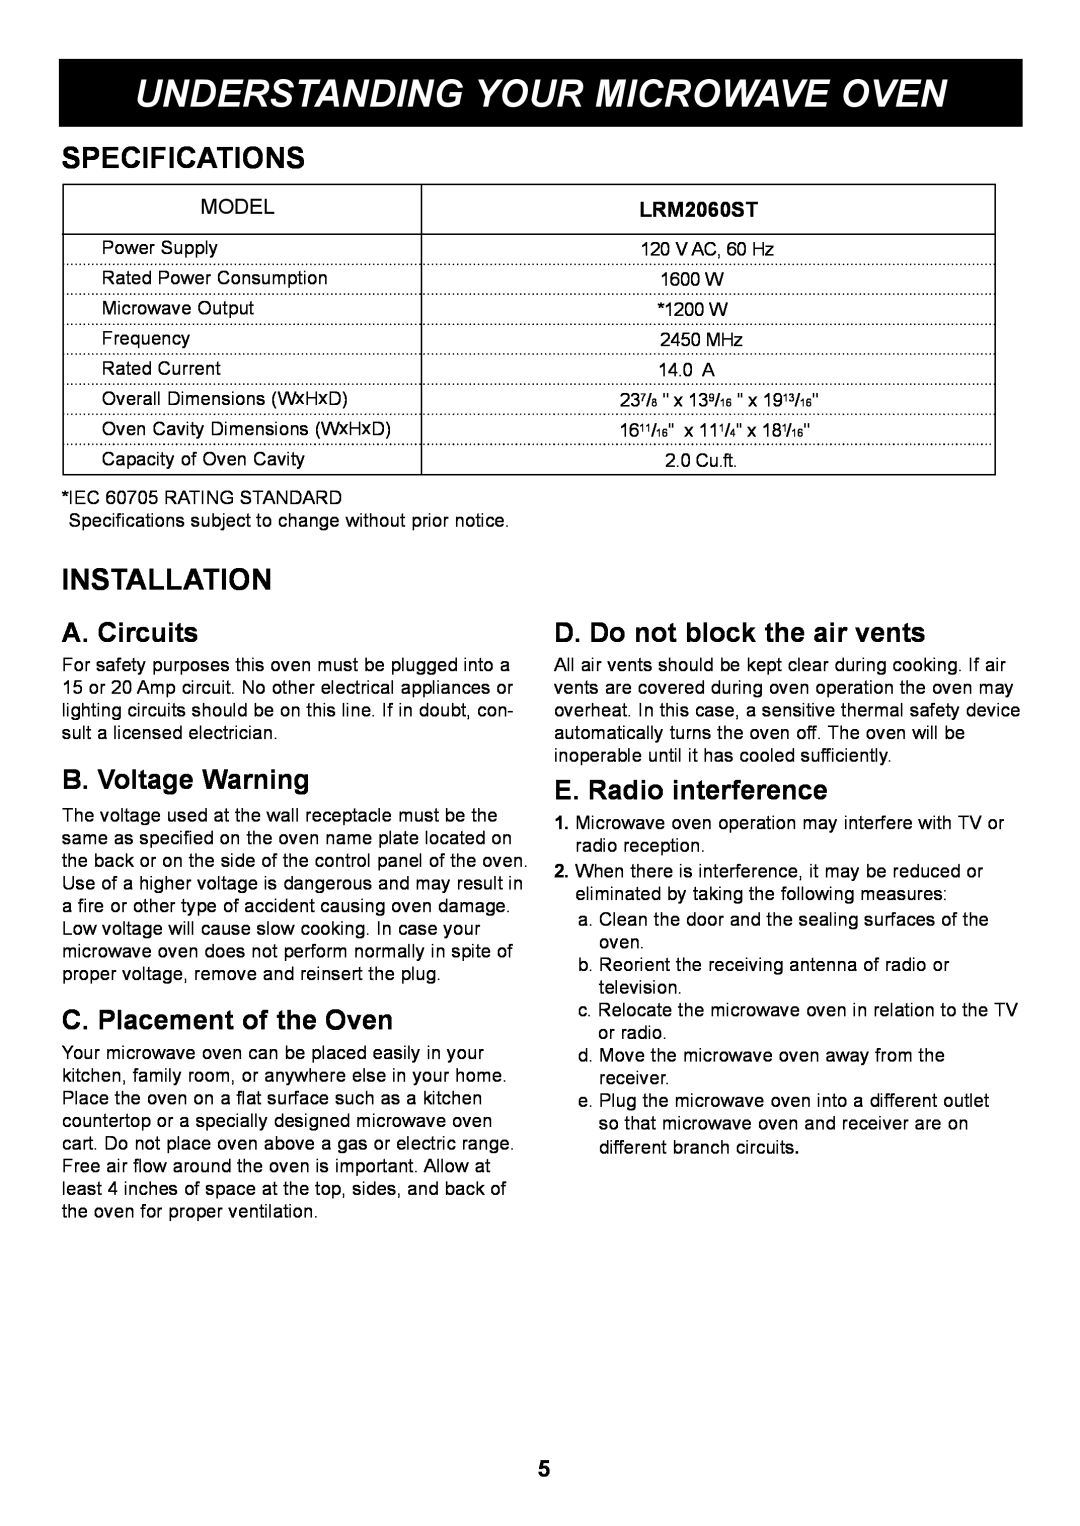 LG Electronics LRM2060ST Understanding Your Microwave Oven, Specifications, Installation, A. Circuits, B. Voltage Warning 